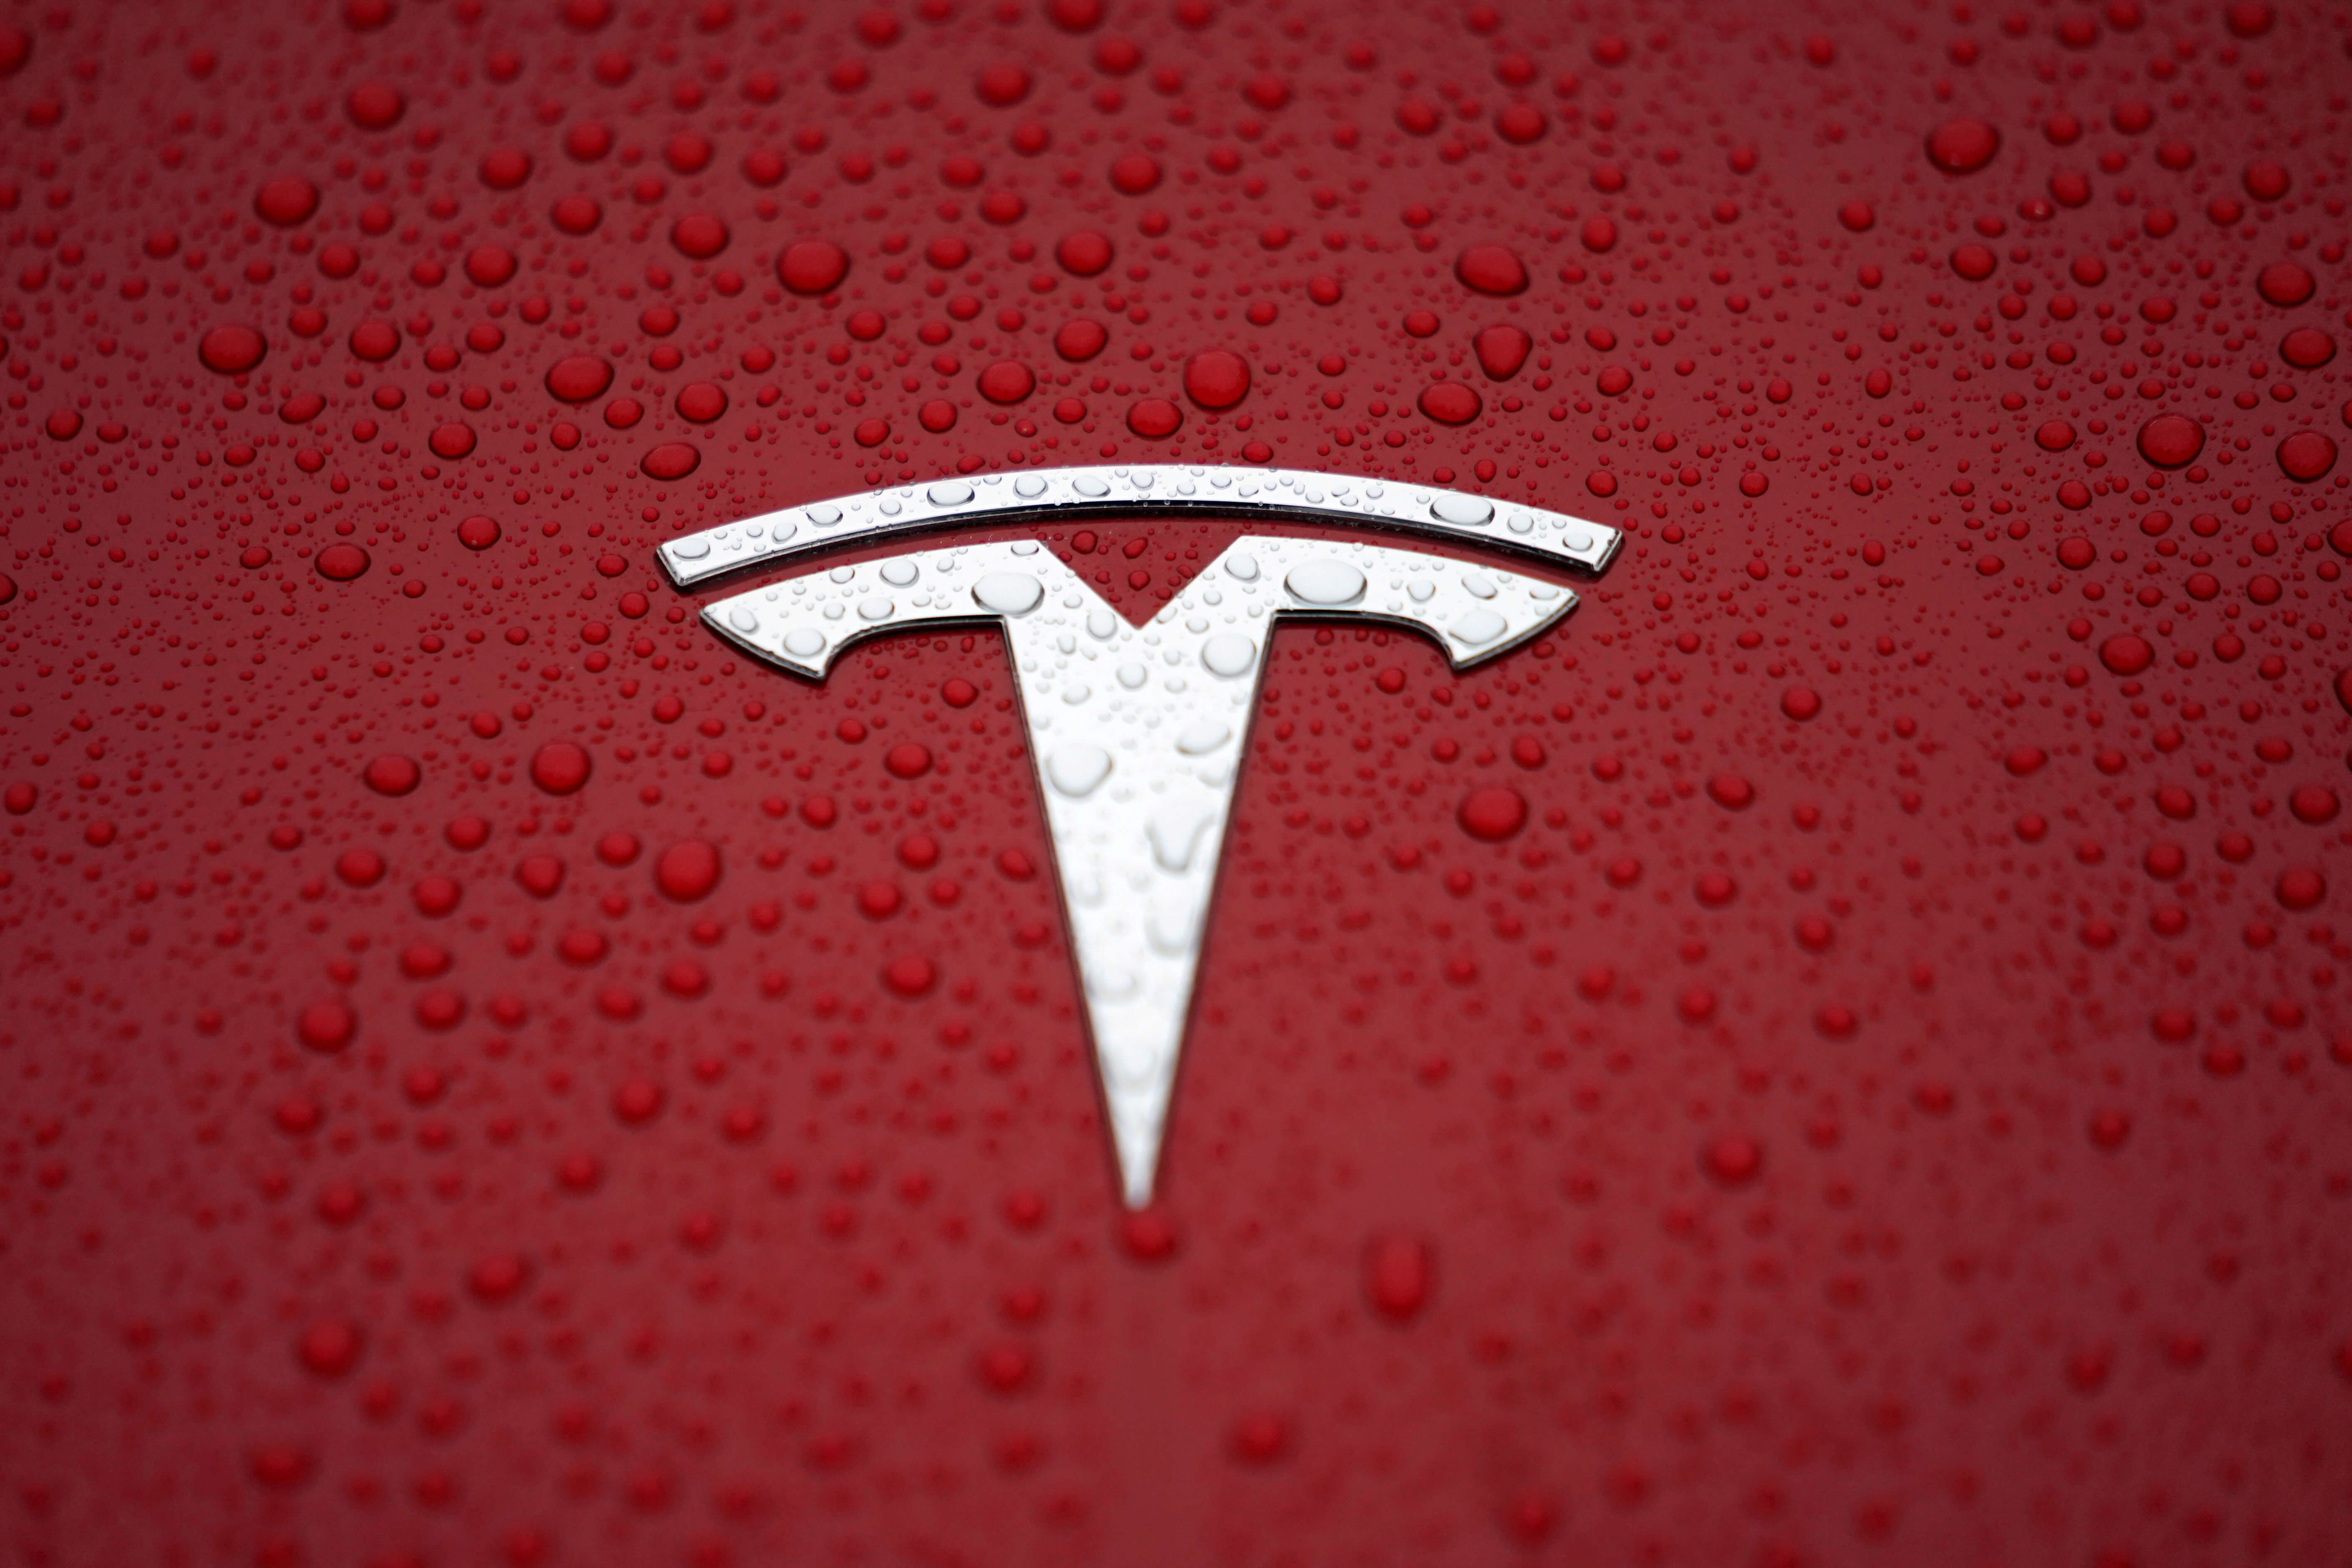 Today I’m sharing details on a new Tesla energy initiative that’s so impres...